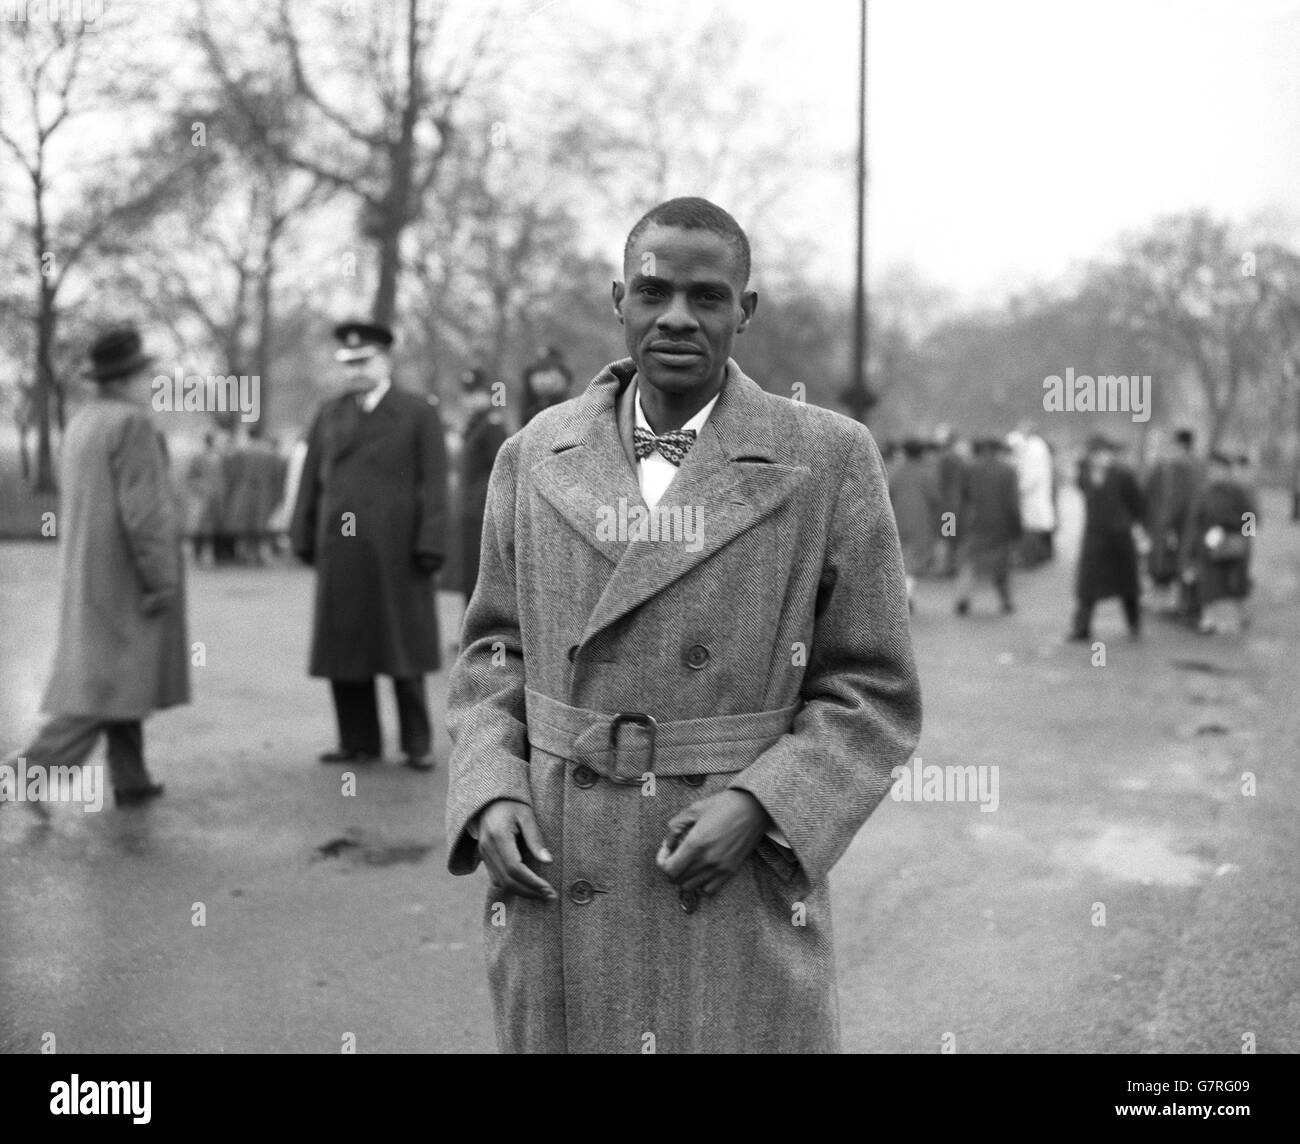 Kanyama Chiume, 29 year old member of the Nyasaland Legislative Council and publicity secretary of the Nyasaland African Congress, in Hyde Park as he was about to take part in a march to Trafalgar Square called by the committee of African Organisations to protest against action against Africans in Nyasaland and the Federation go Rhodesia. Kanyama Chiume, regarded as one of the chief aides of Dr. Hastings K. Banda, the arrested congress leader, was in Kenya on his way home from Acera and London when he heard of the detention of prominent Congress members in Nyasaland. Stock Photo